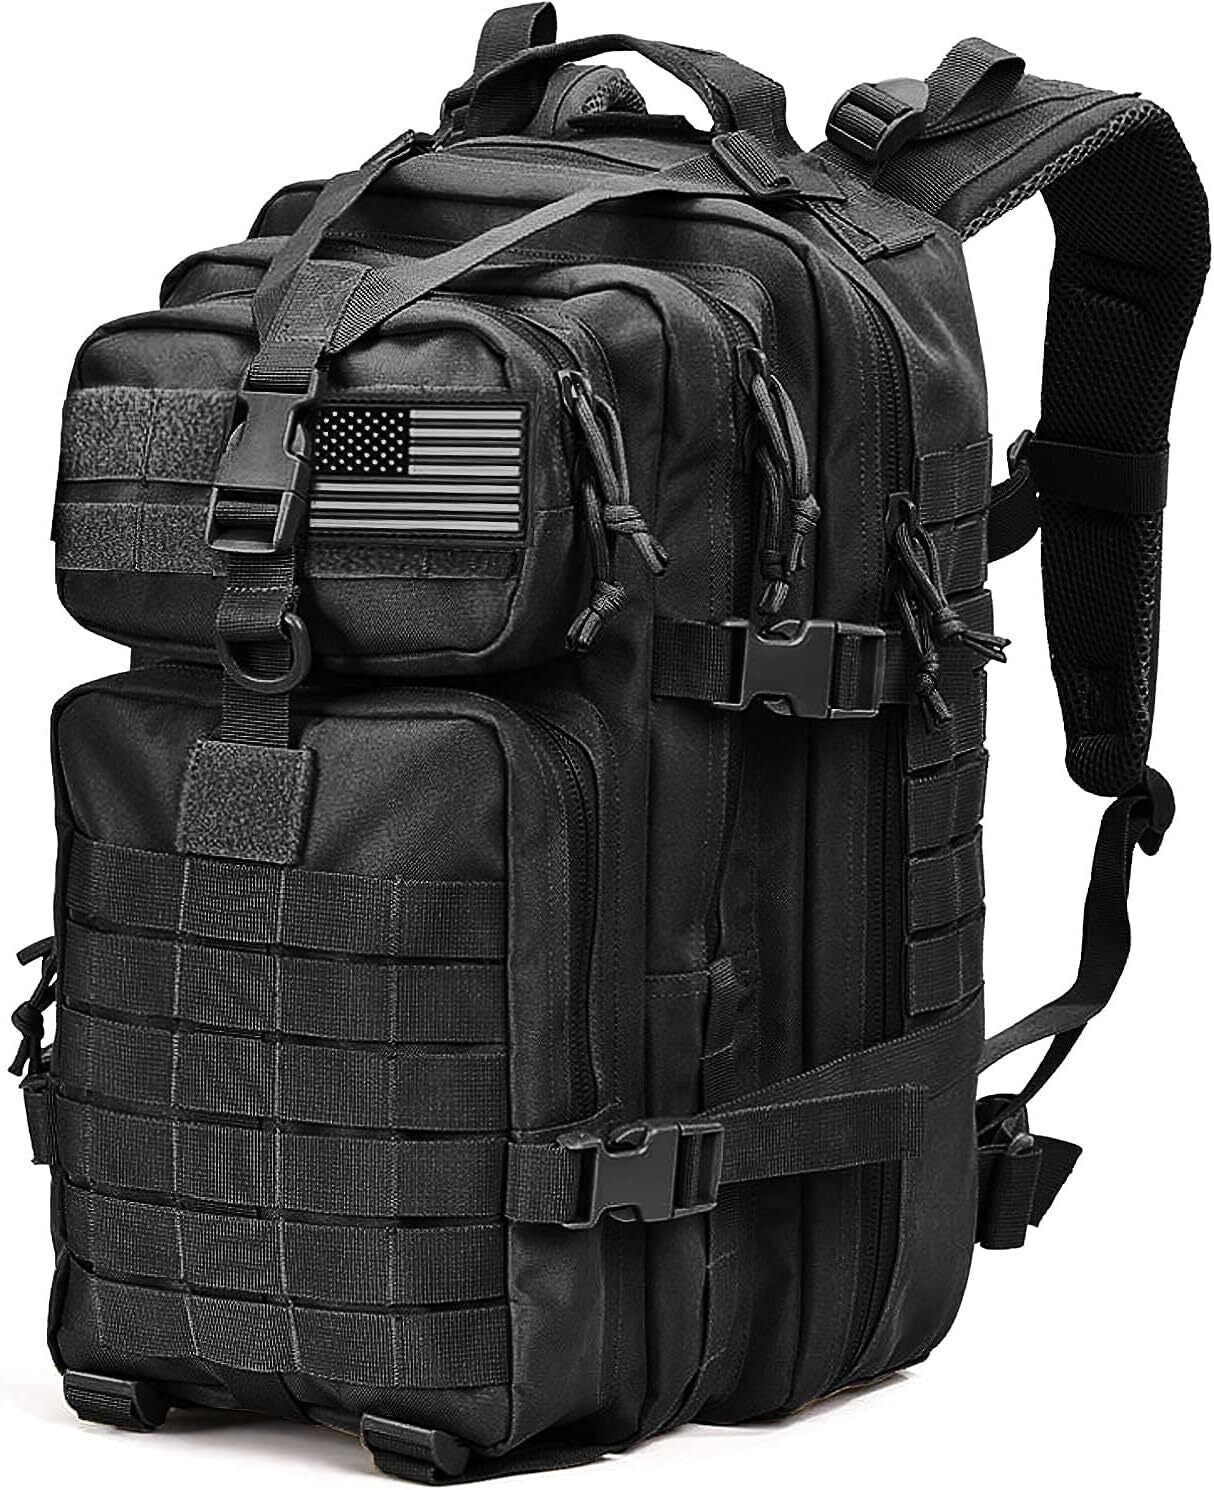 45L Military Tactical Backpack Large Army 3 Day Rucksack - A